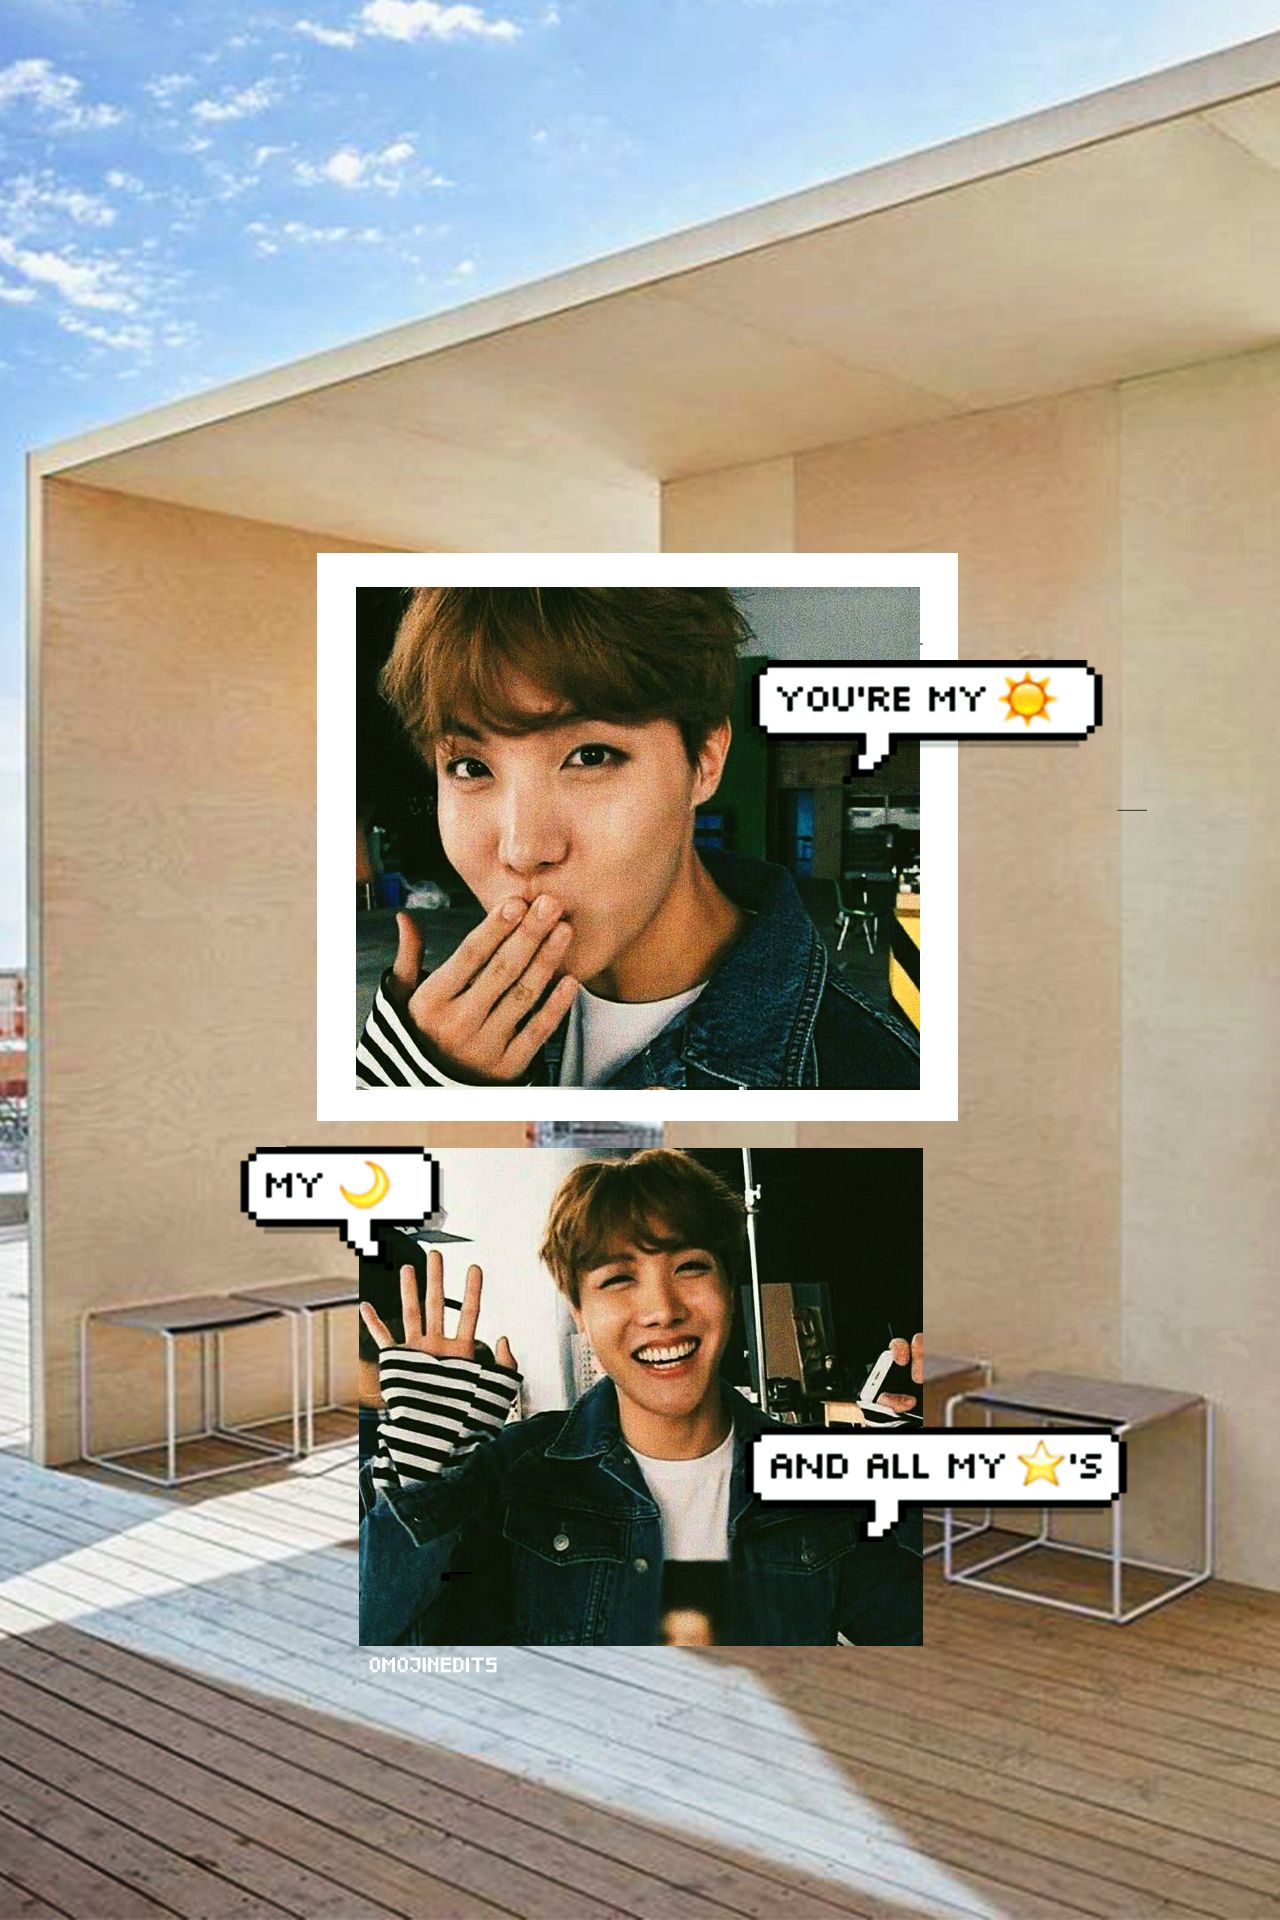 JUNG HOSEOK AESTHETIC WALLPAPER. BTS J HOPE JHOPE WALLPAPER Smile Is Such A Sight I Tell U That